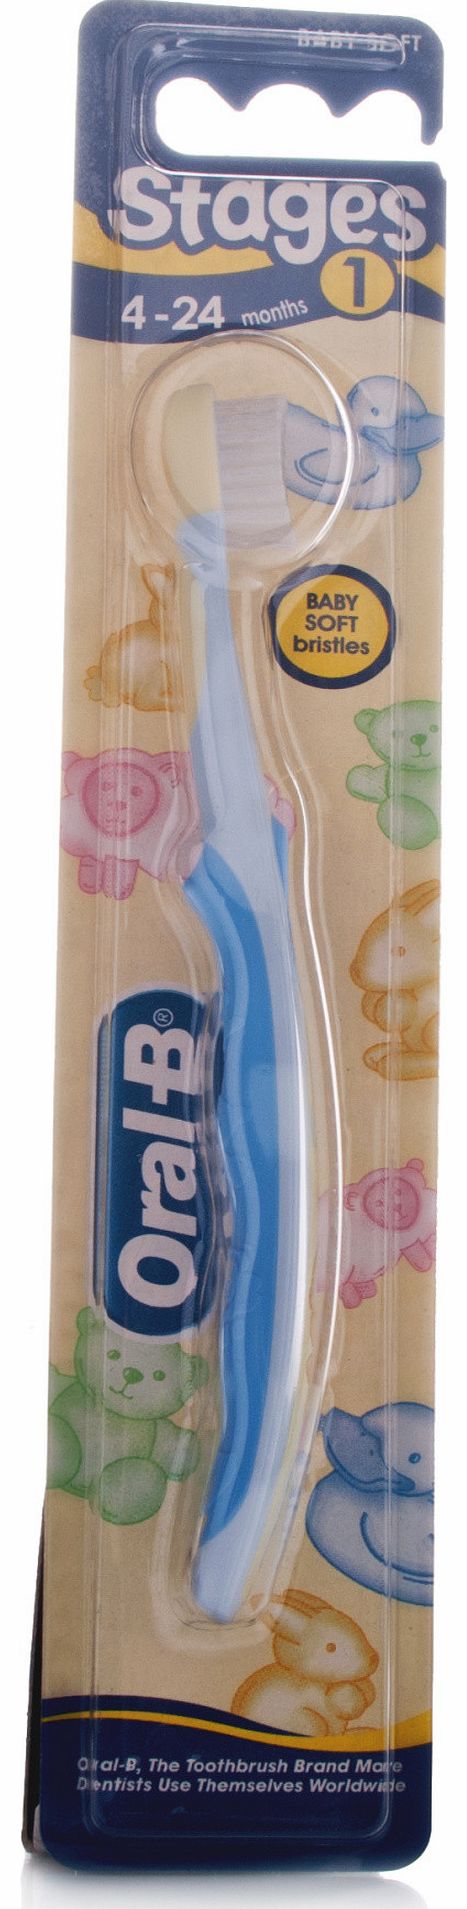 Oral-B Stages Toothbrush 4-24 Months